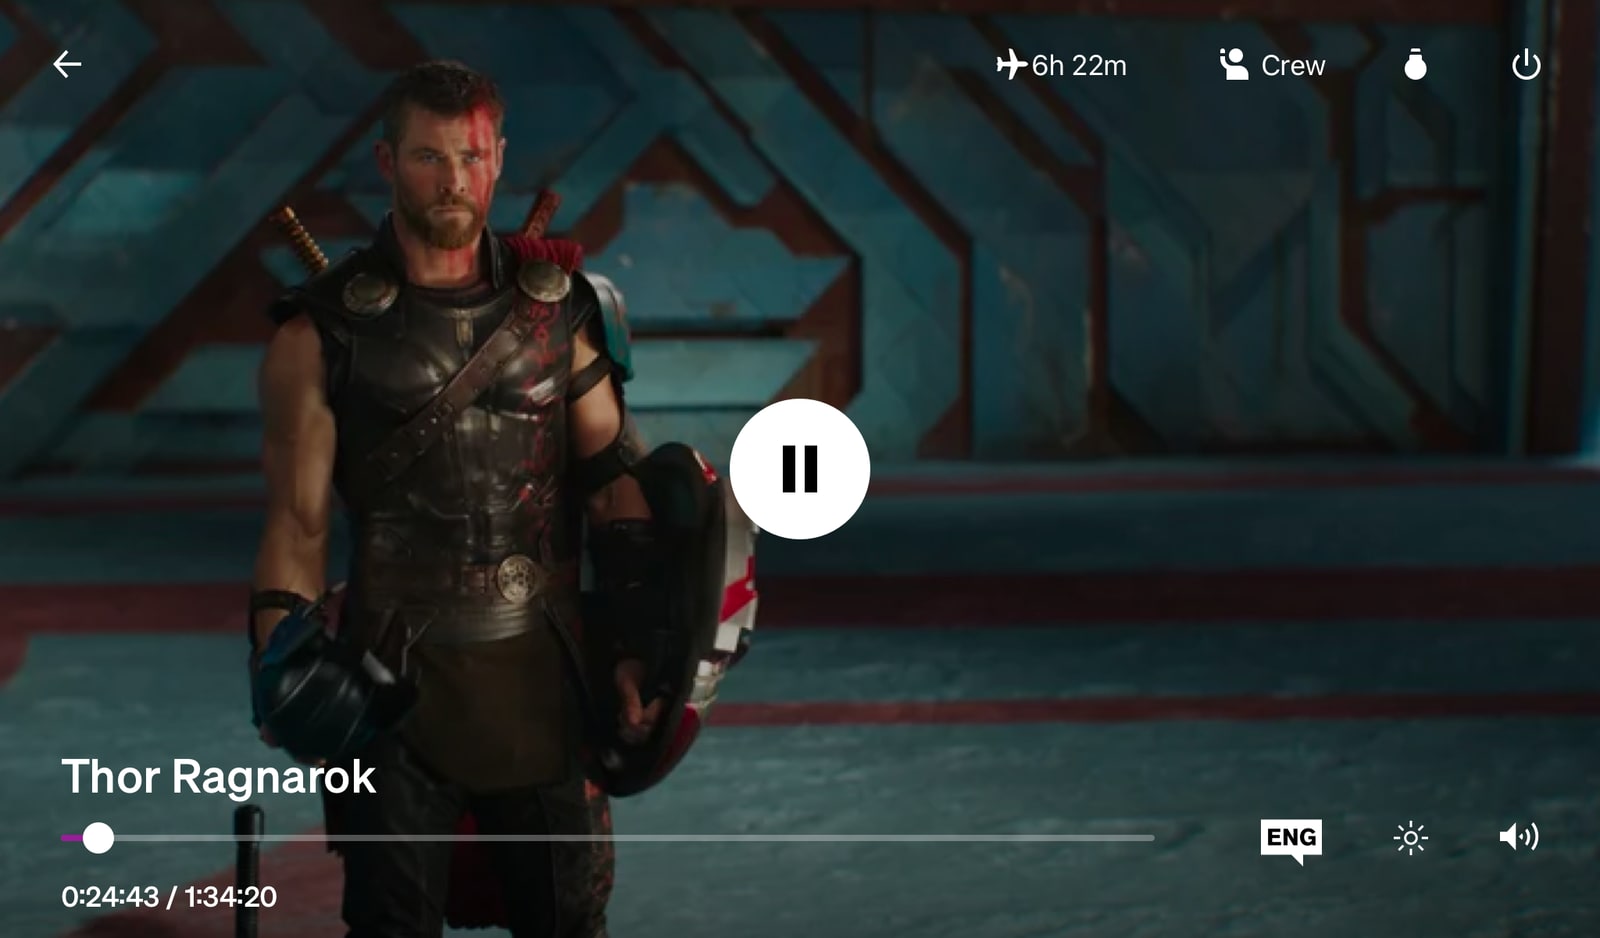 Video player showing controls with vignette over Thor being awesome in Ragnarok.